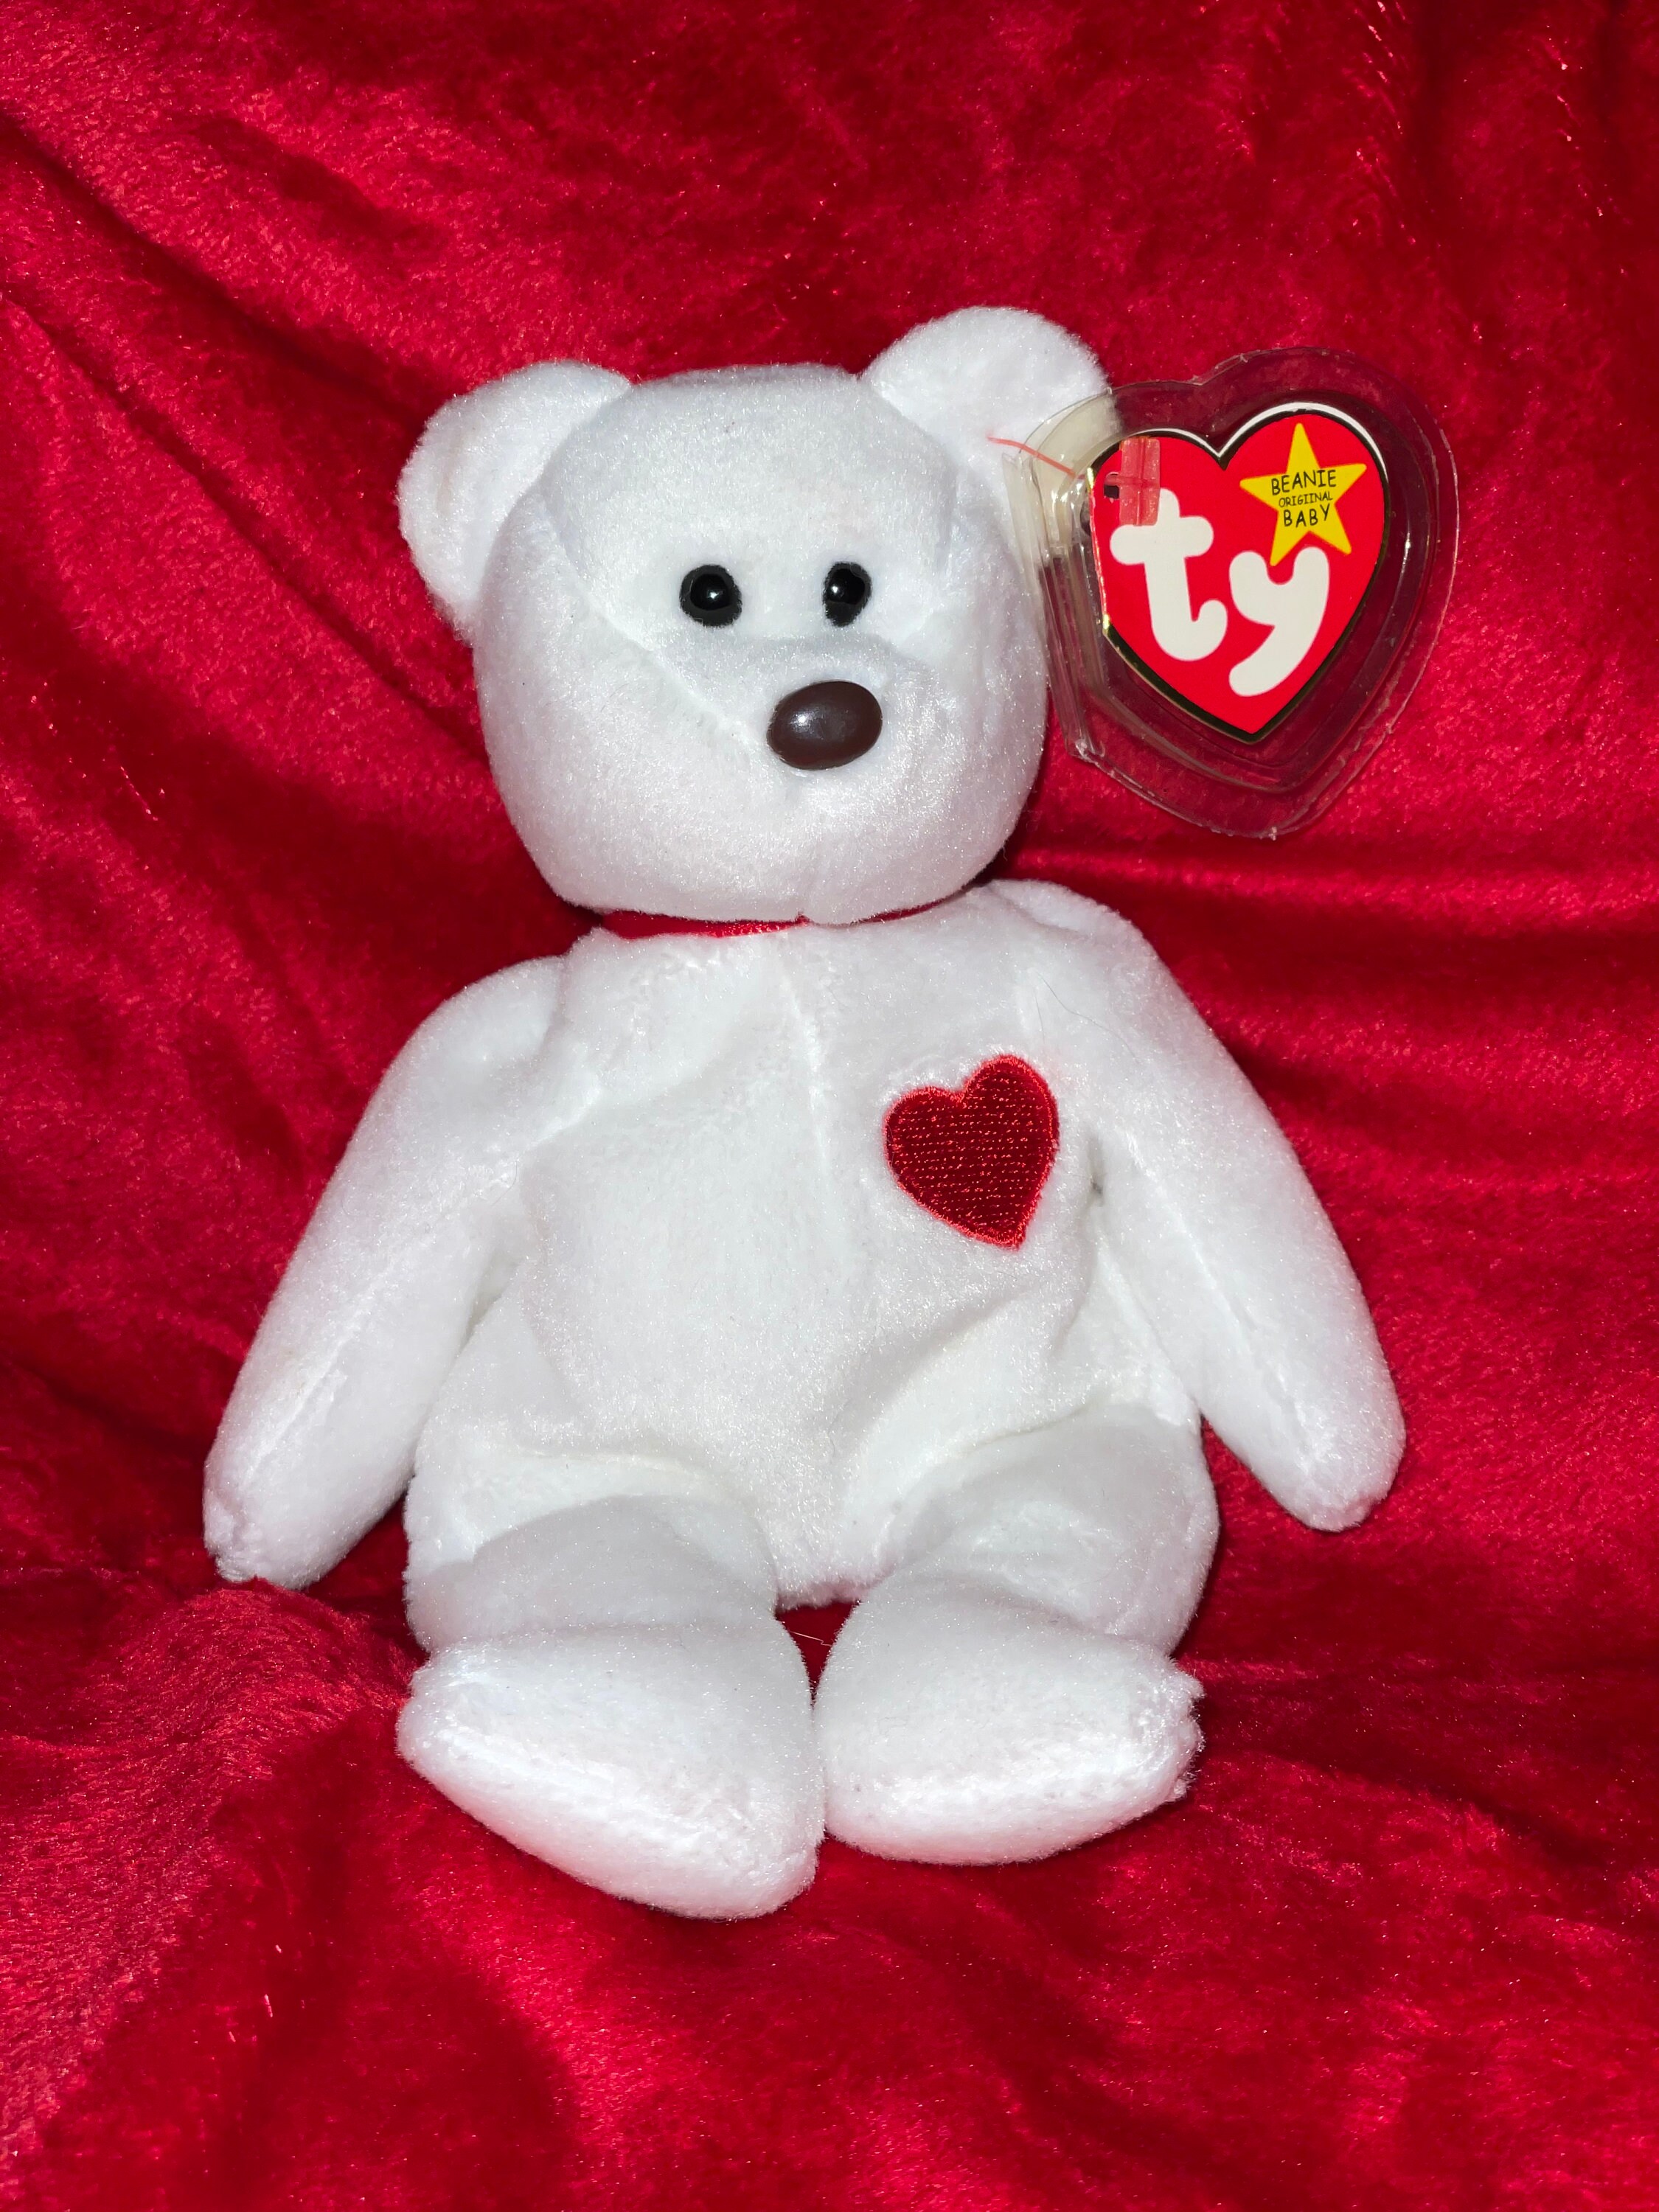 1994 Valentino Beanie Baby With Errors and Brown Nose - Etsy